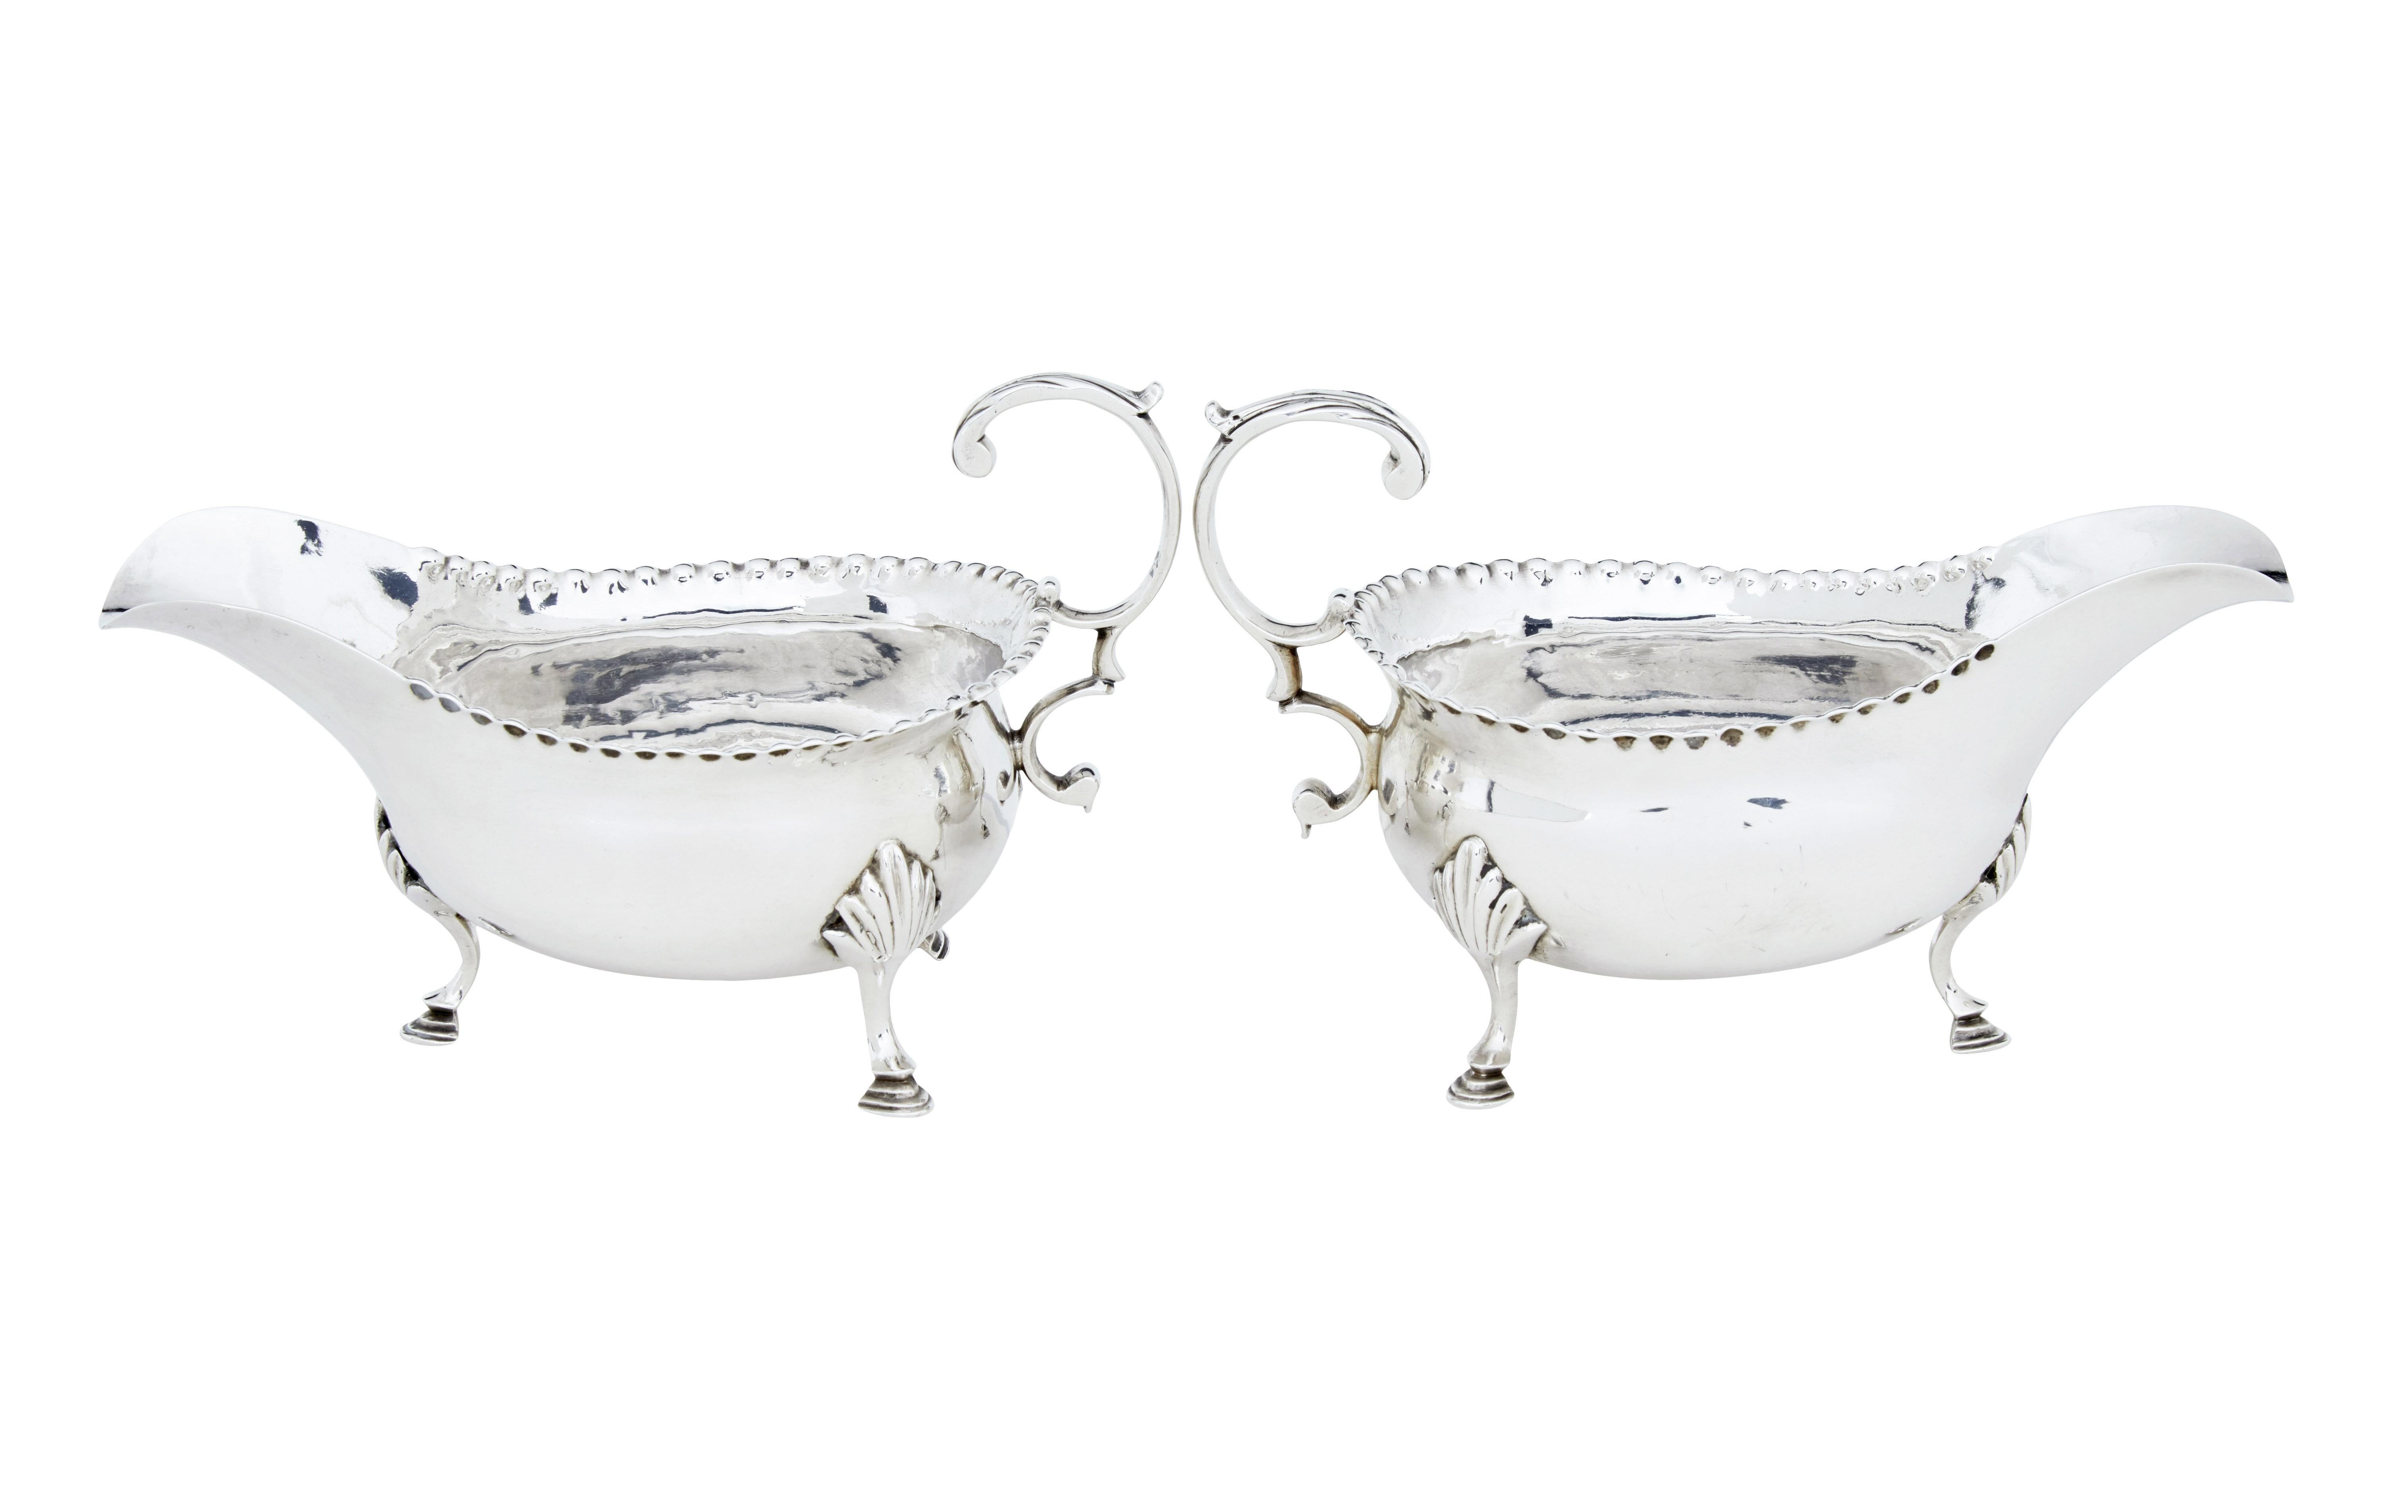 English Pair of 18th century silver sauce boats by Hester Bateman For Sale